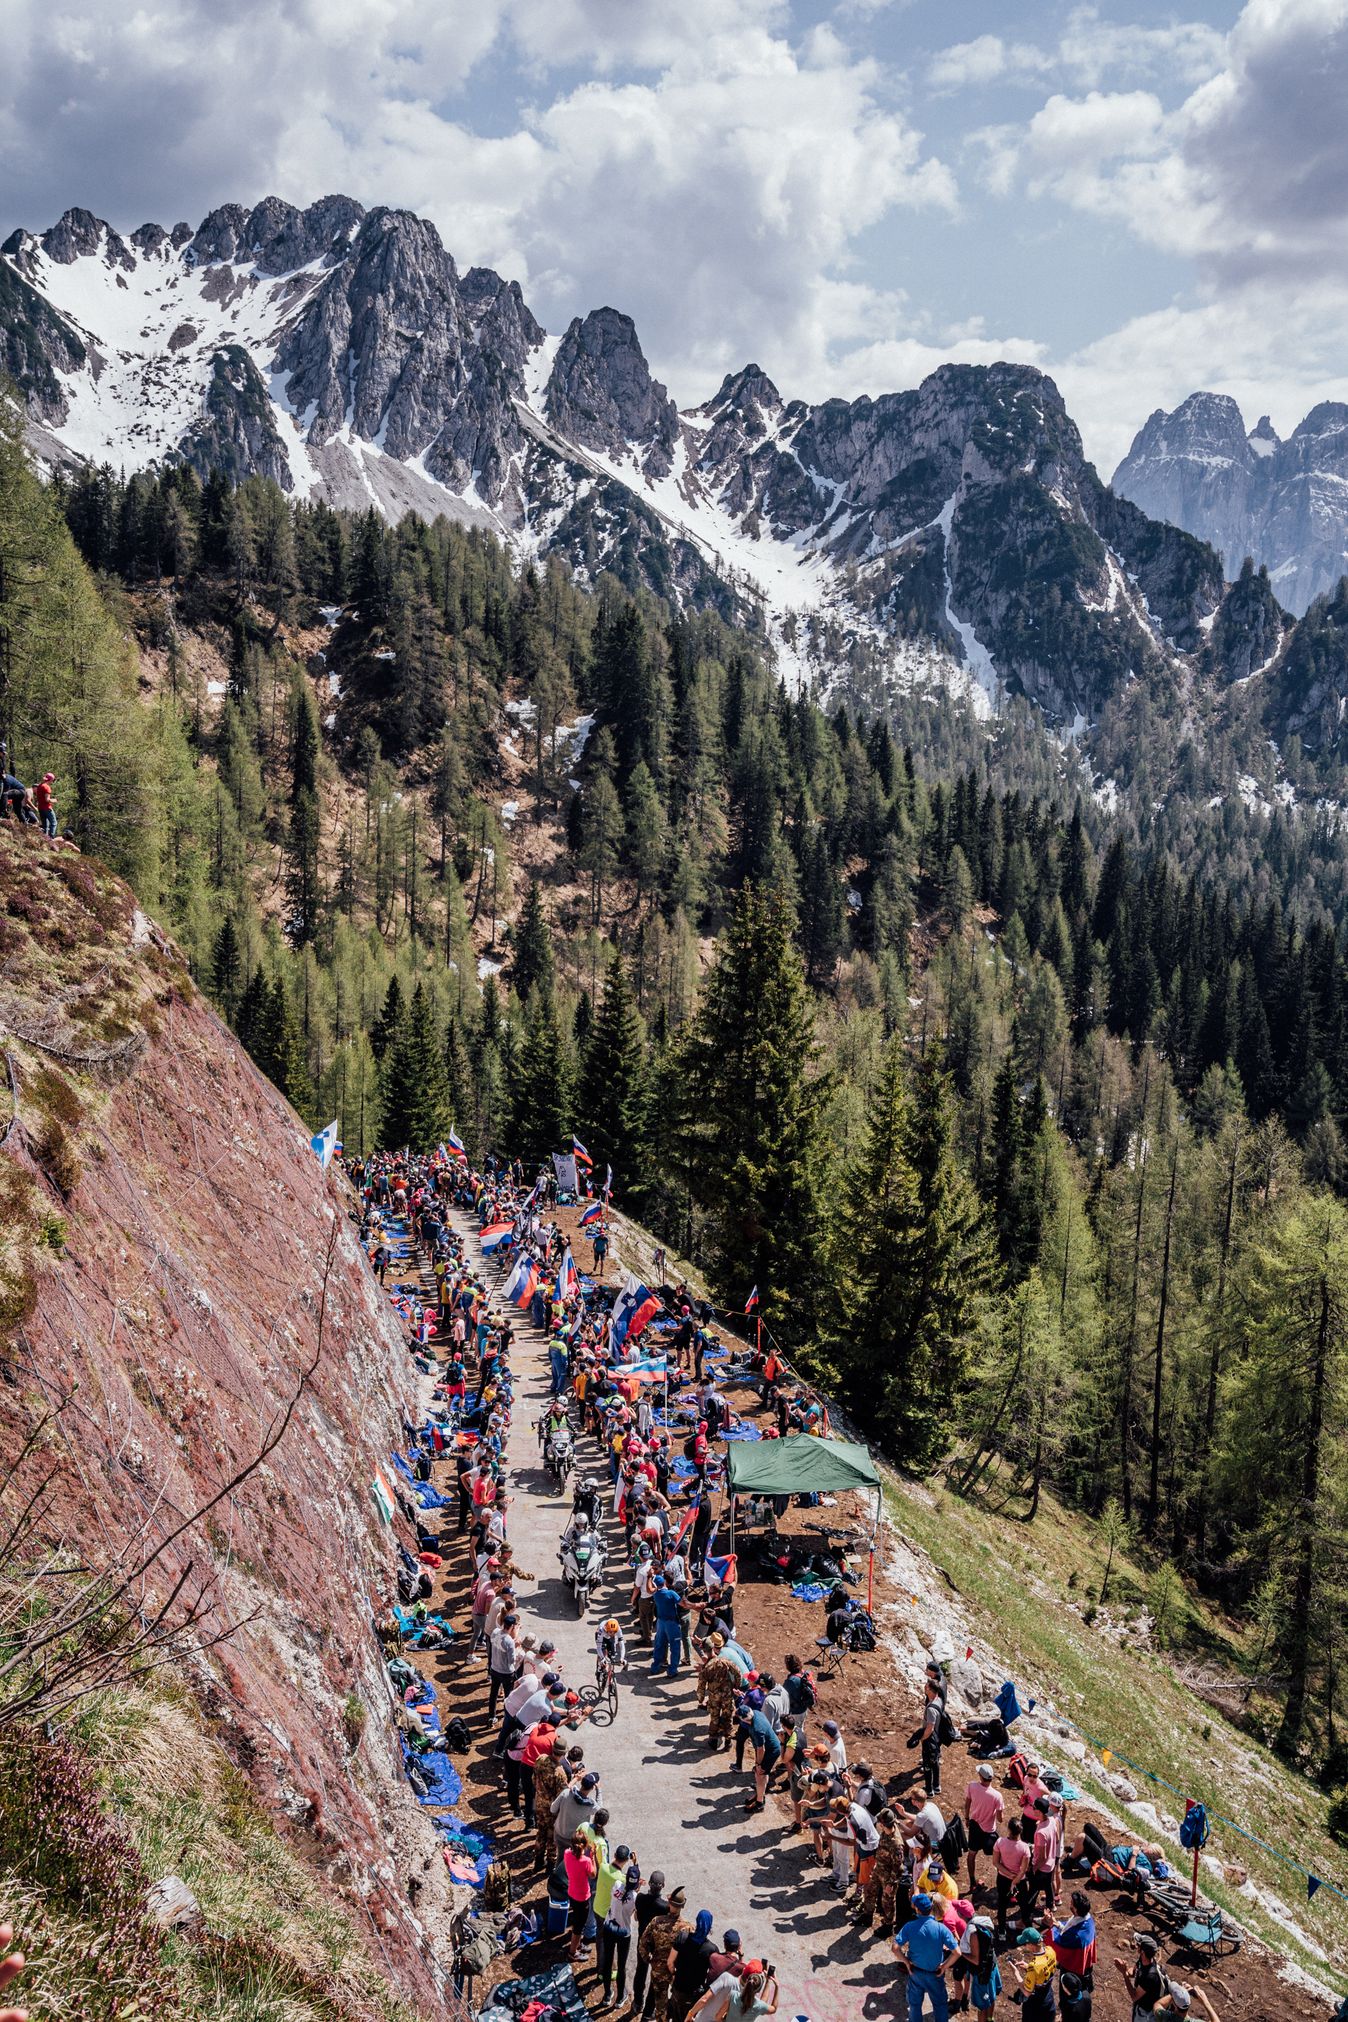 More verticality, more wonder, more Giro. Few races can compete with the scenery, which is one of the biggest draws of the race